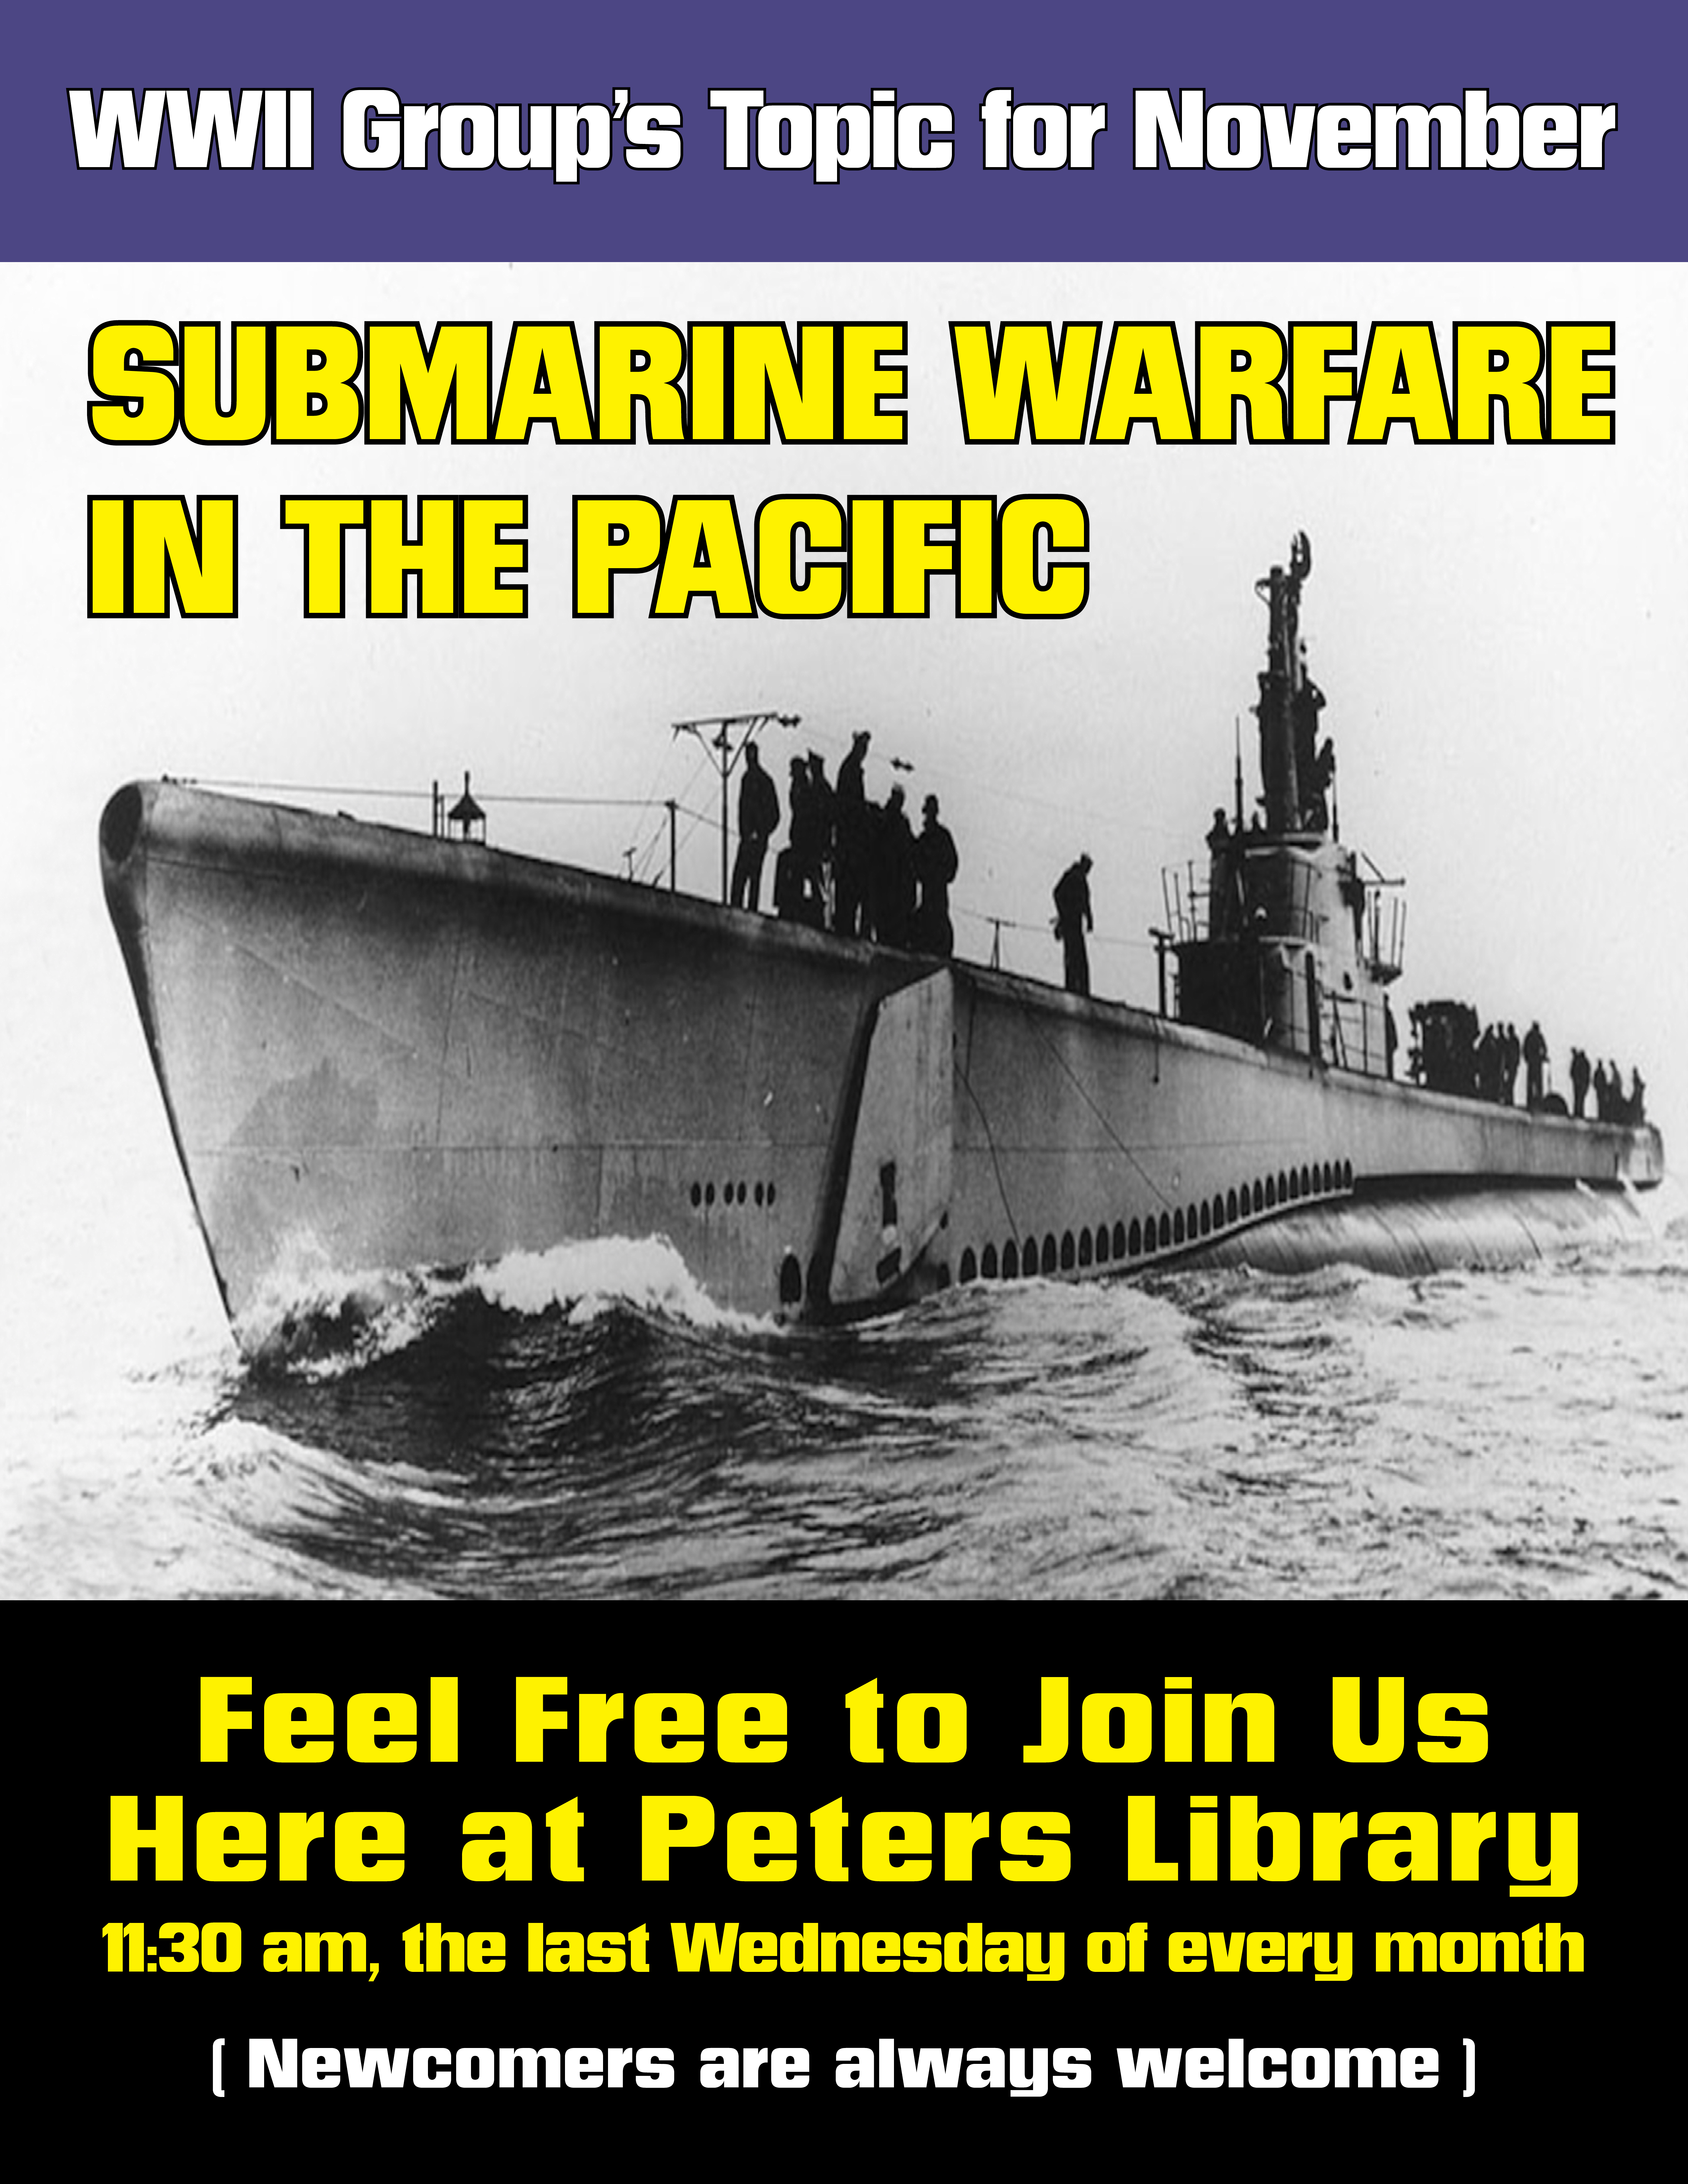 WWII Discussion Group Everybody Welcome November's Topic: Submarine Warfare in the Pacific - Image of submarine emerged from water with people standing on deck